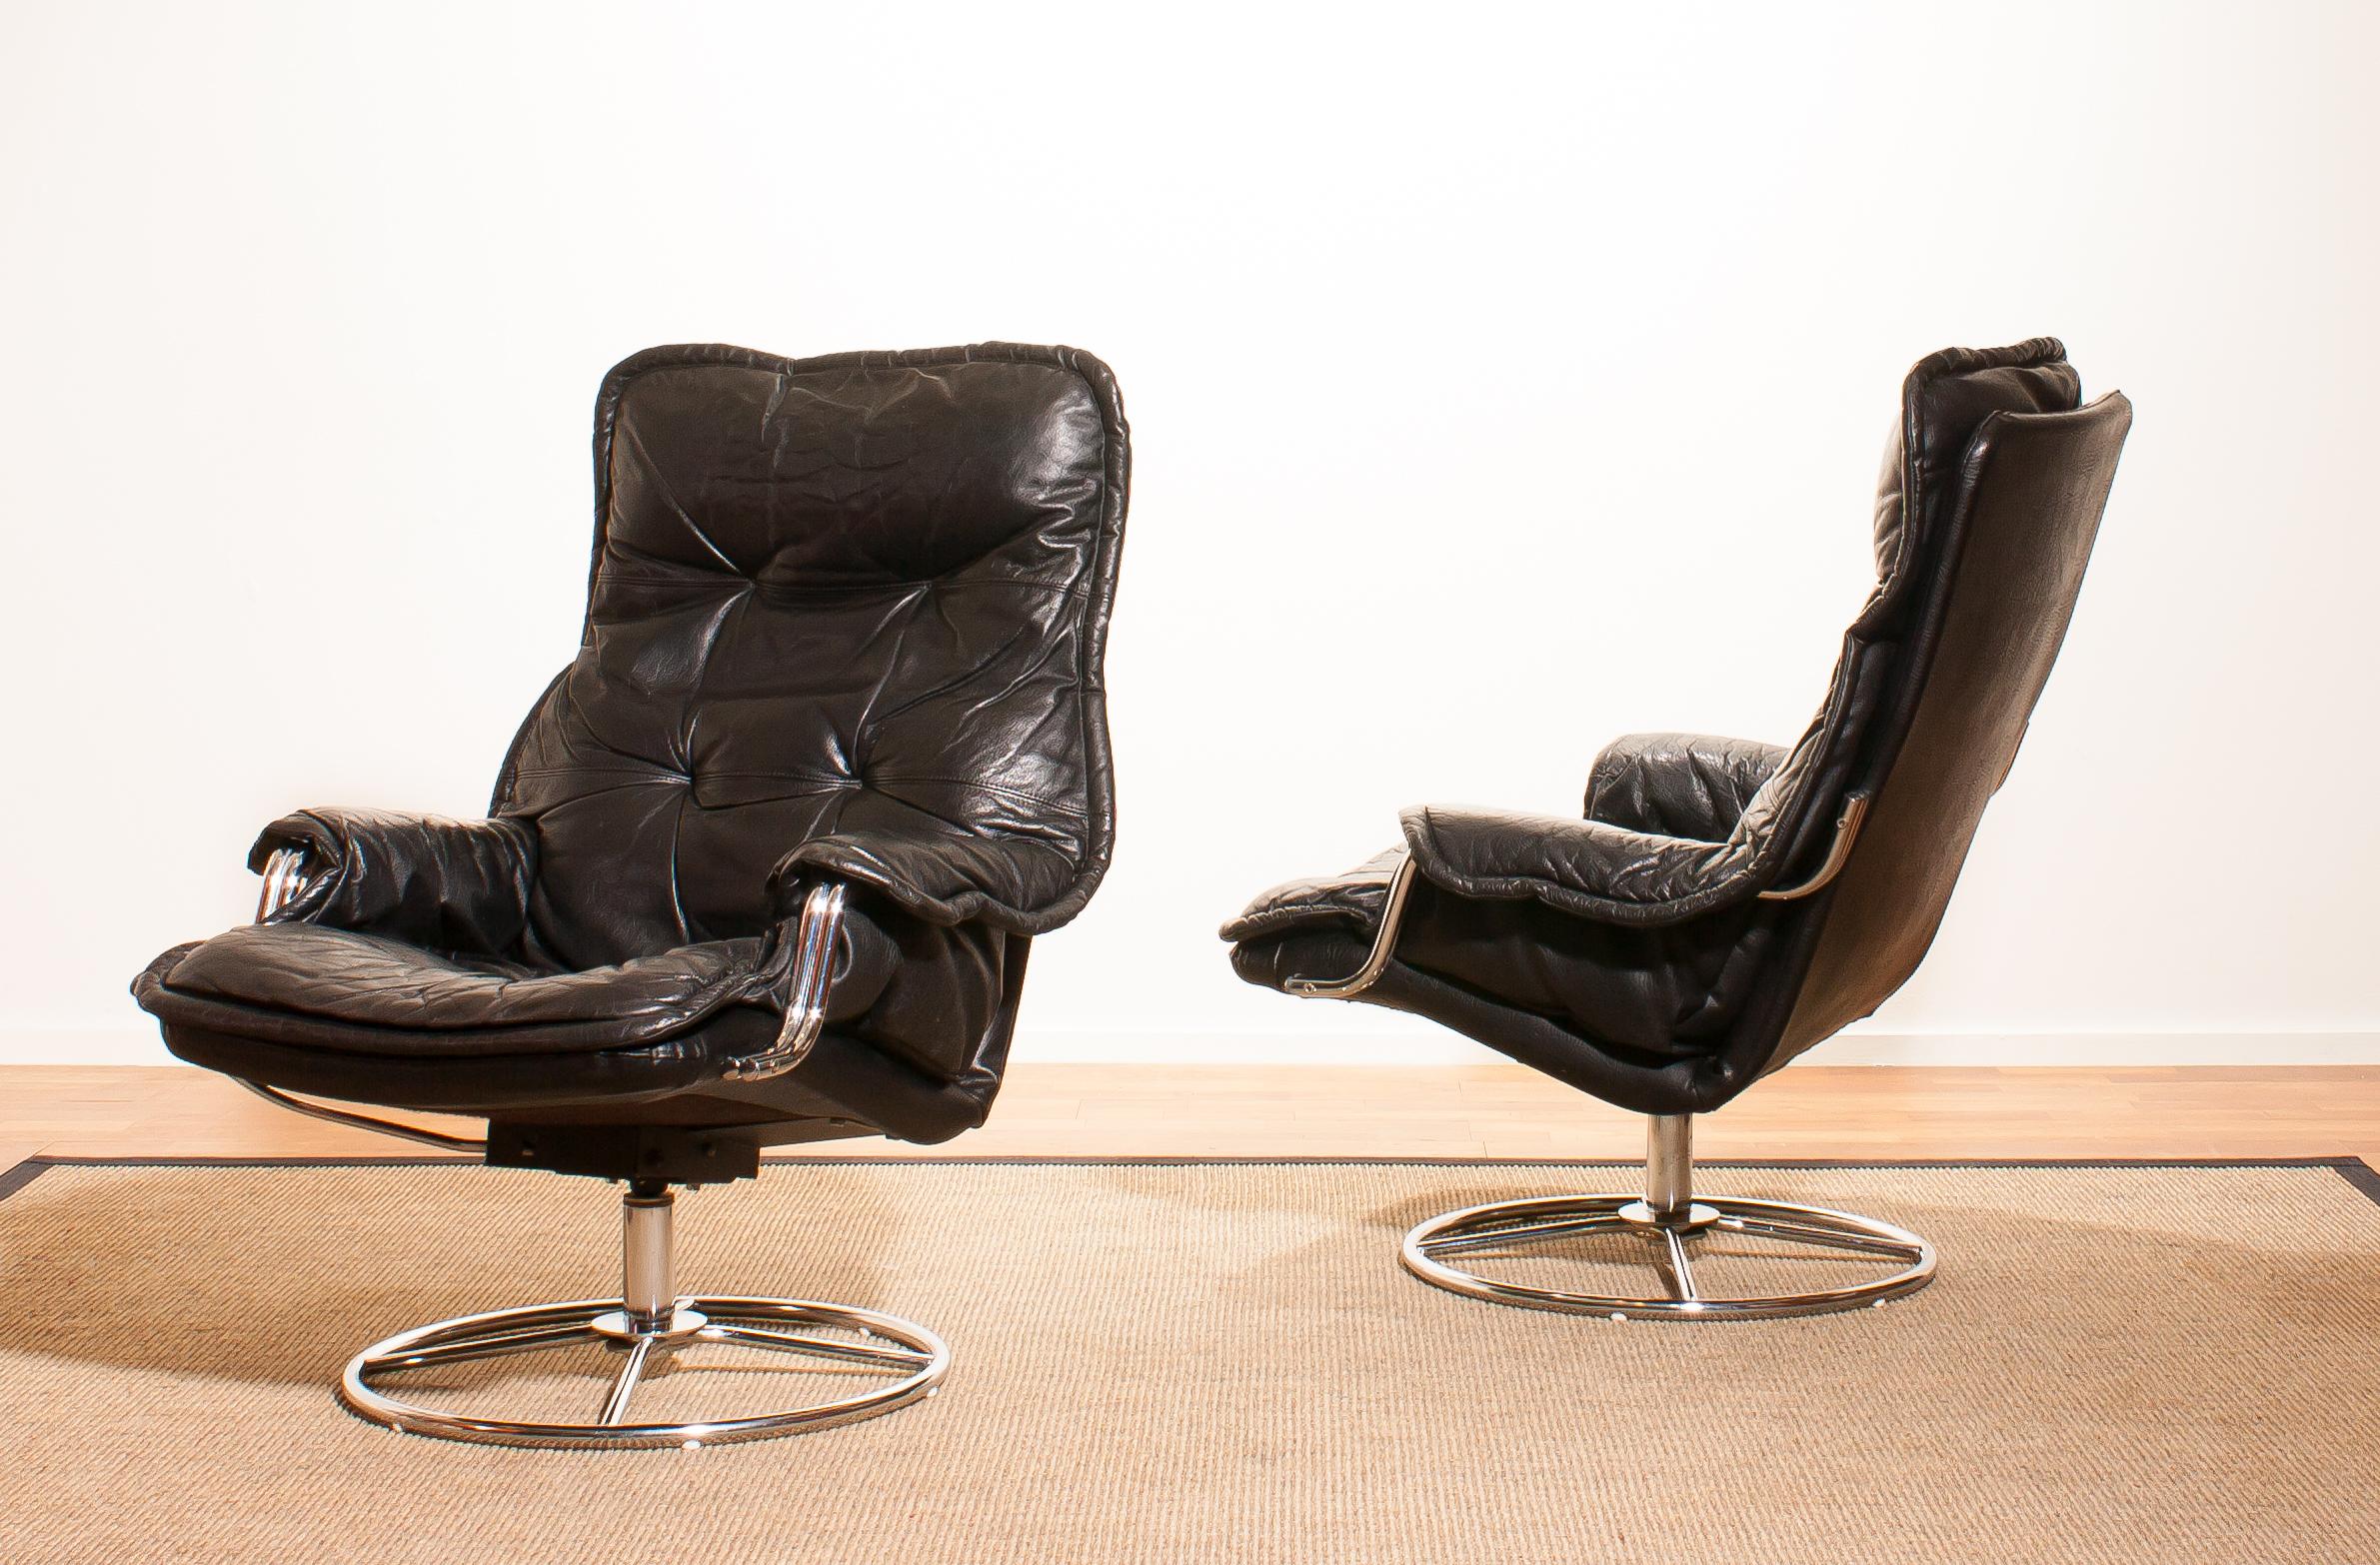 1970s Pair of Black Leather Swivel Chrome Steel Lounge Chairs, Sweden 1